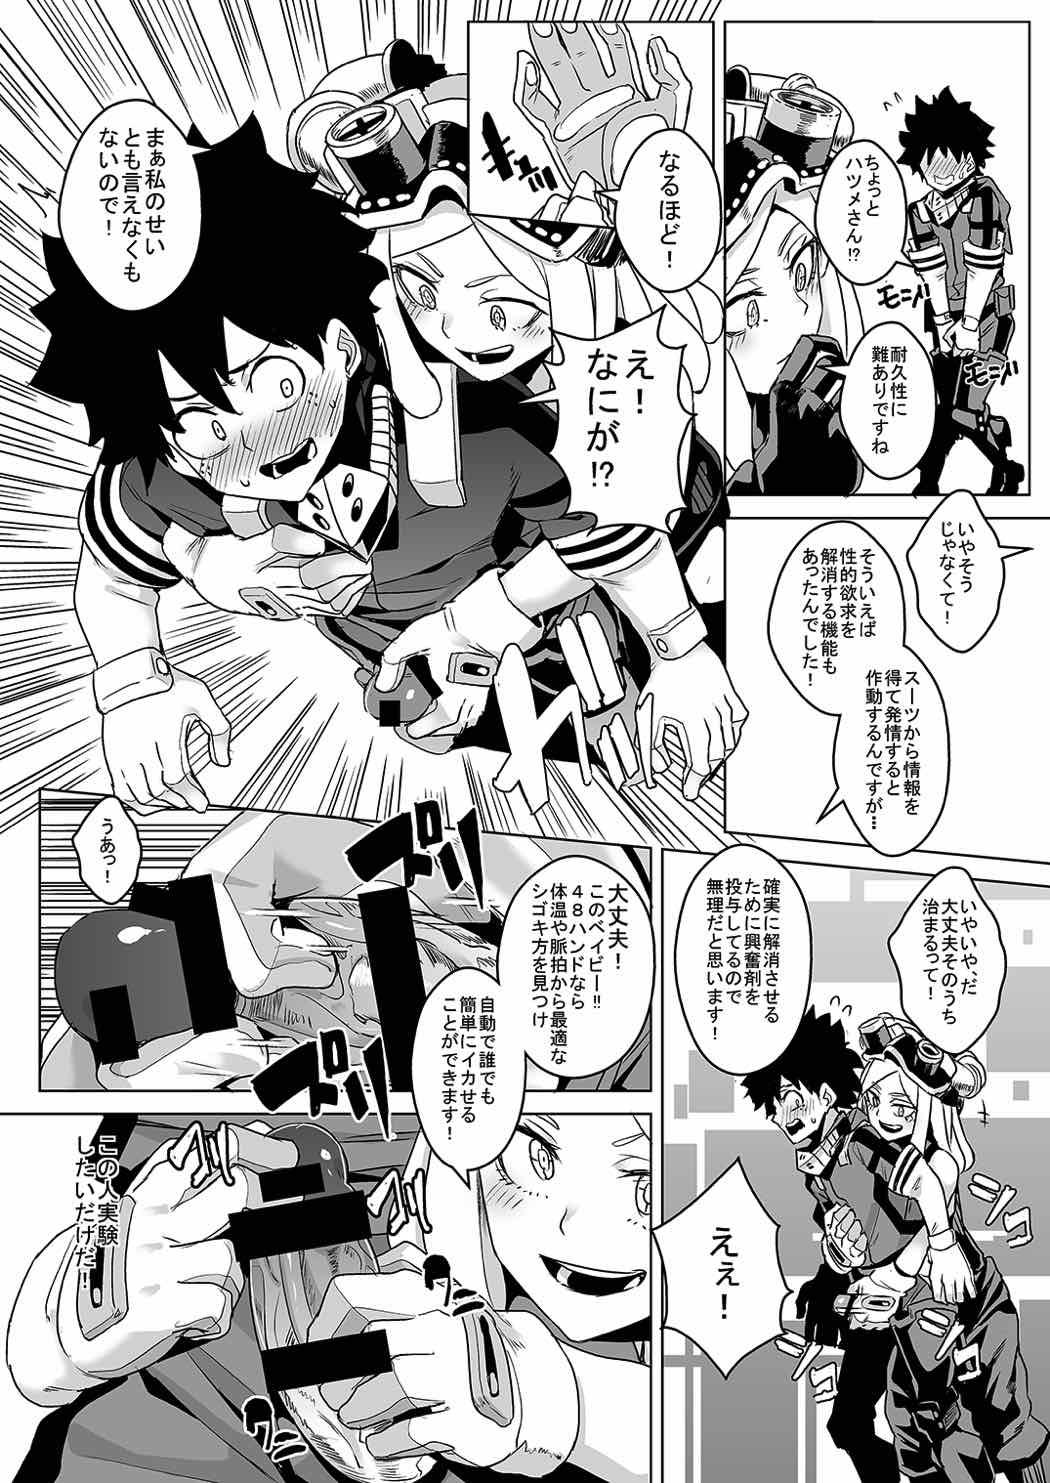 Pmv It's my baby - My hero academia Japanese - Page 6